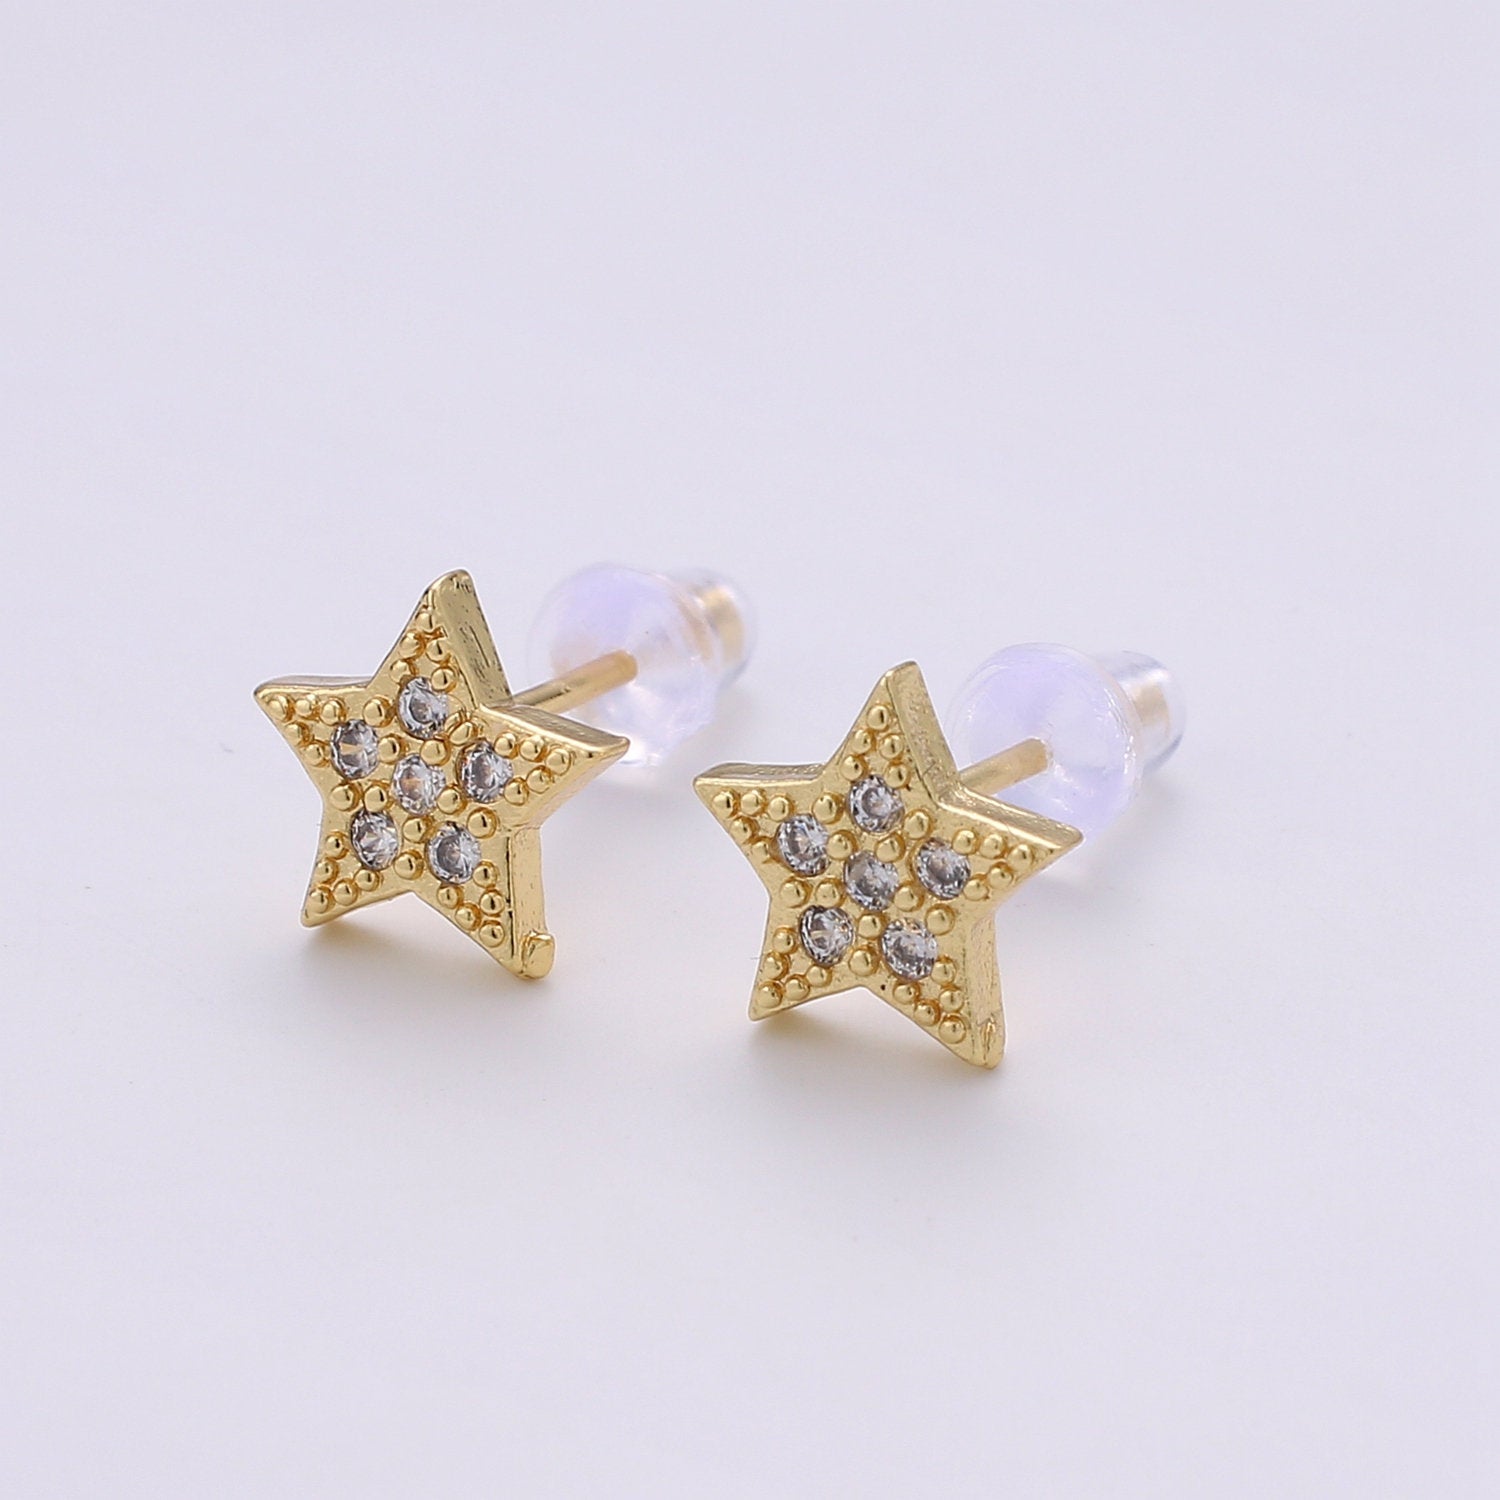 Mini CZ Paved Star Stud Earring Cartilage Earring, Gold Star stud, dainty cartilage earring gold moon stud earring, sparkly Pushback stud - DLUXCA